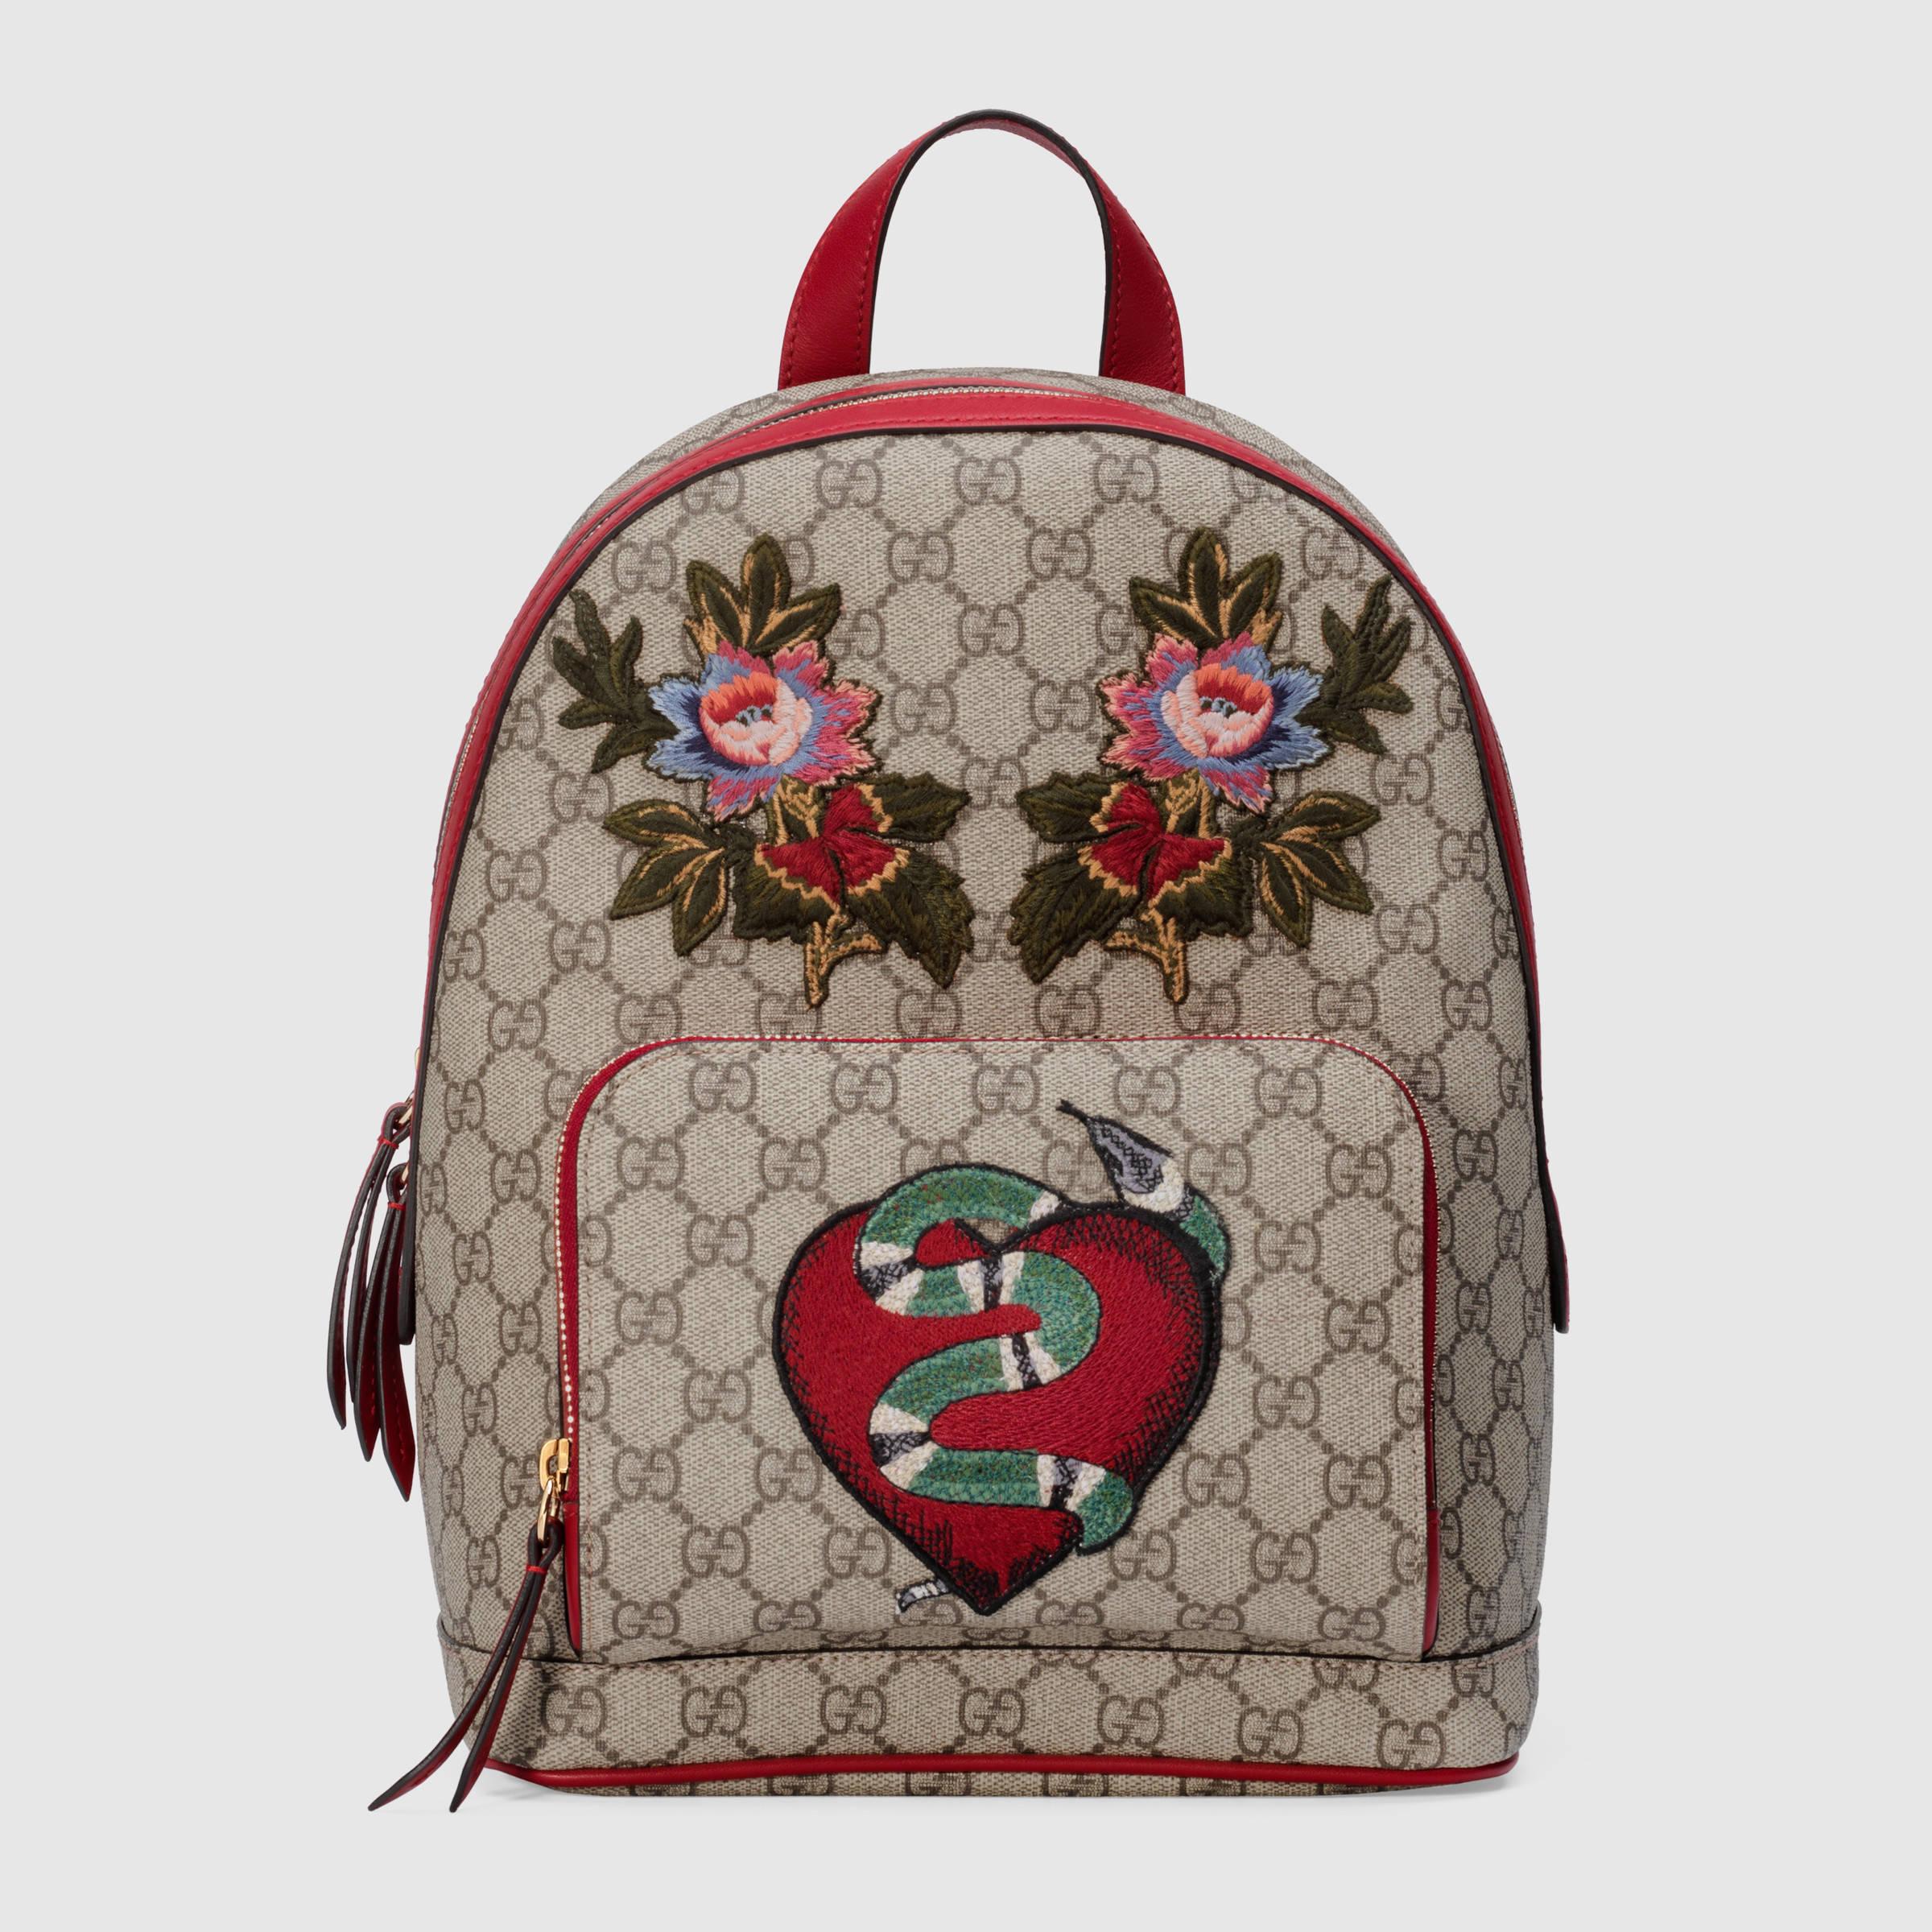 Lyst - Gucci Limited Edition Gg Supreme Backpack